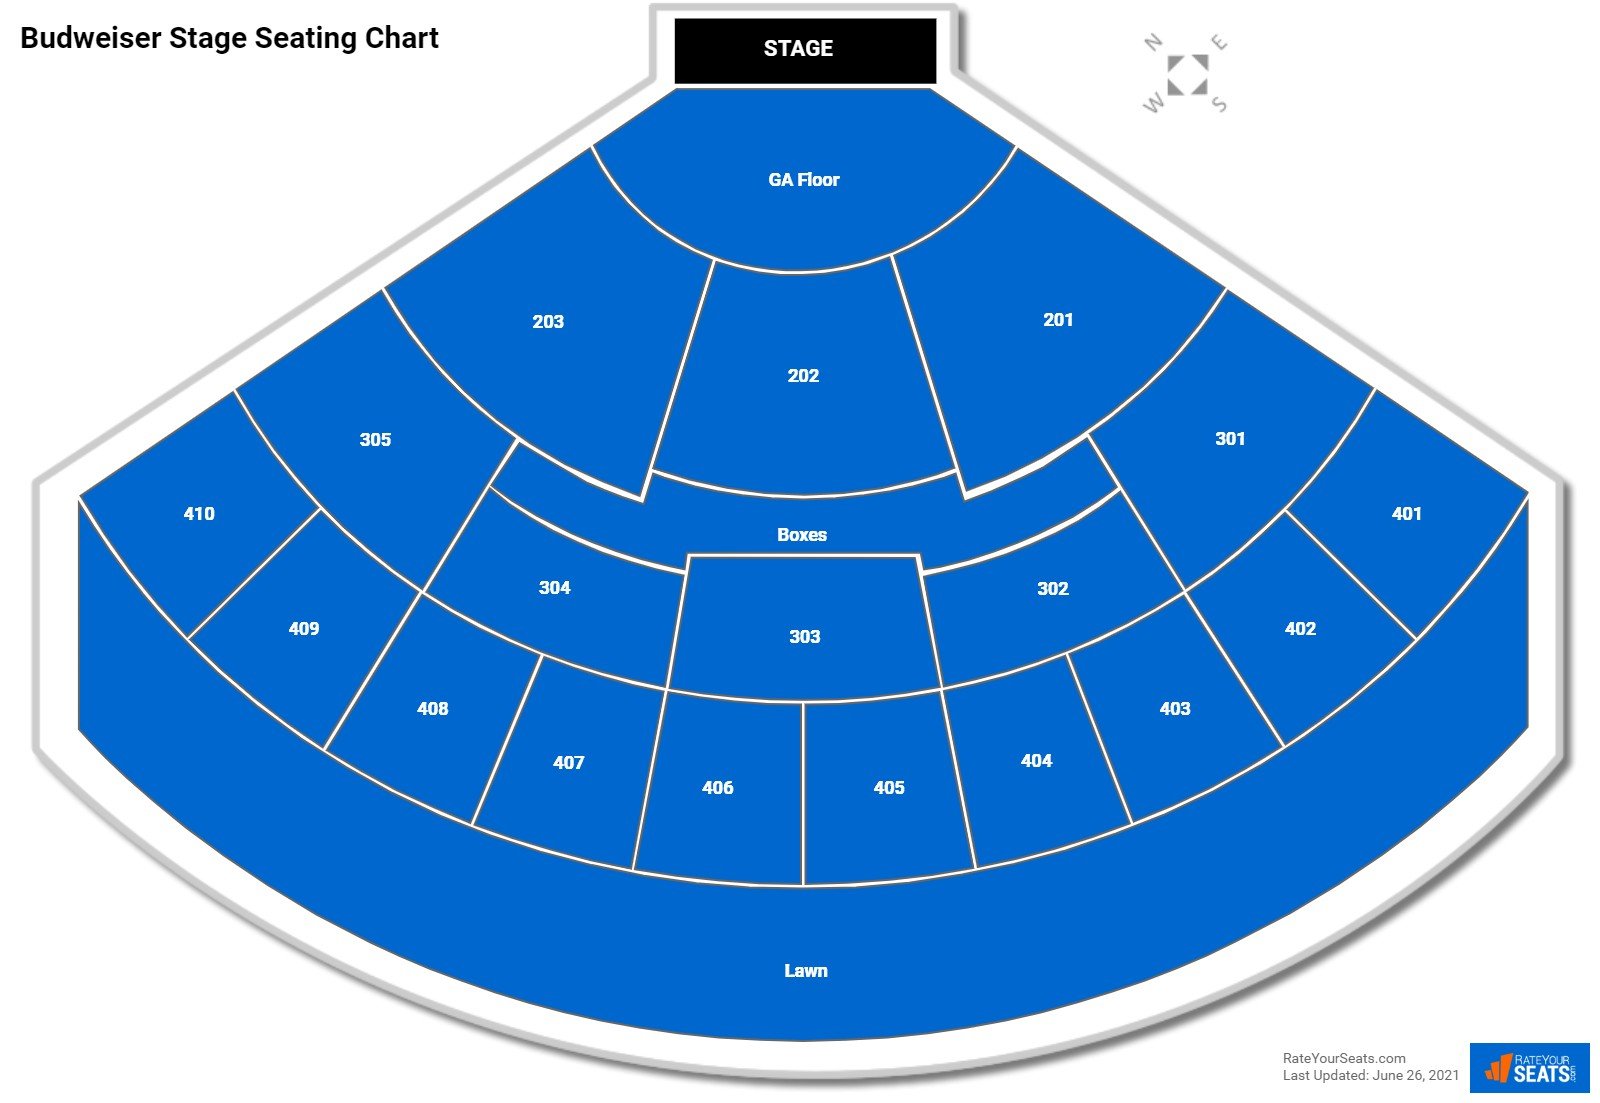 Budweiser Stage Concert Seating Chart